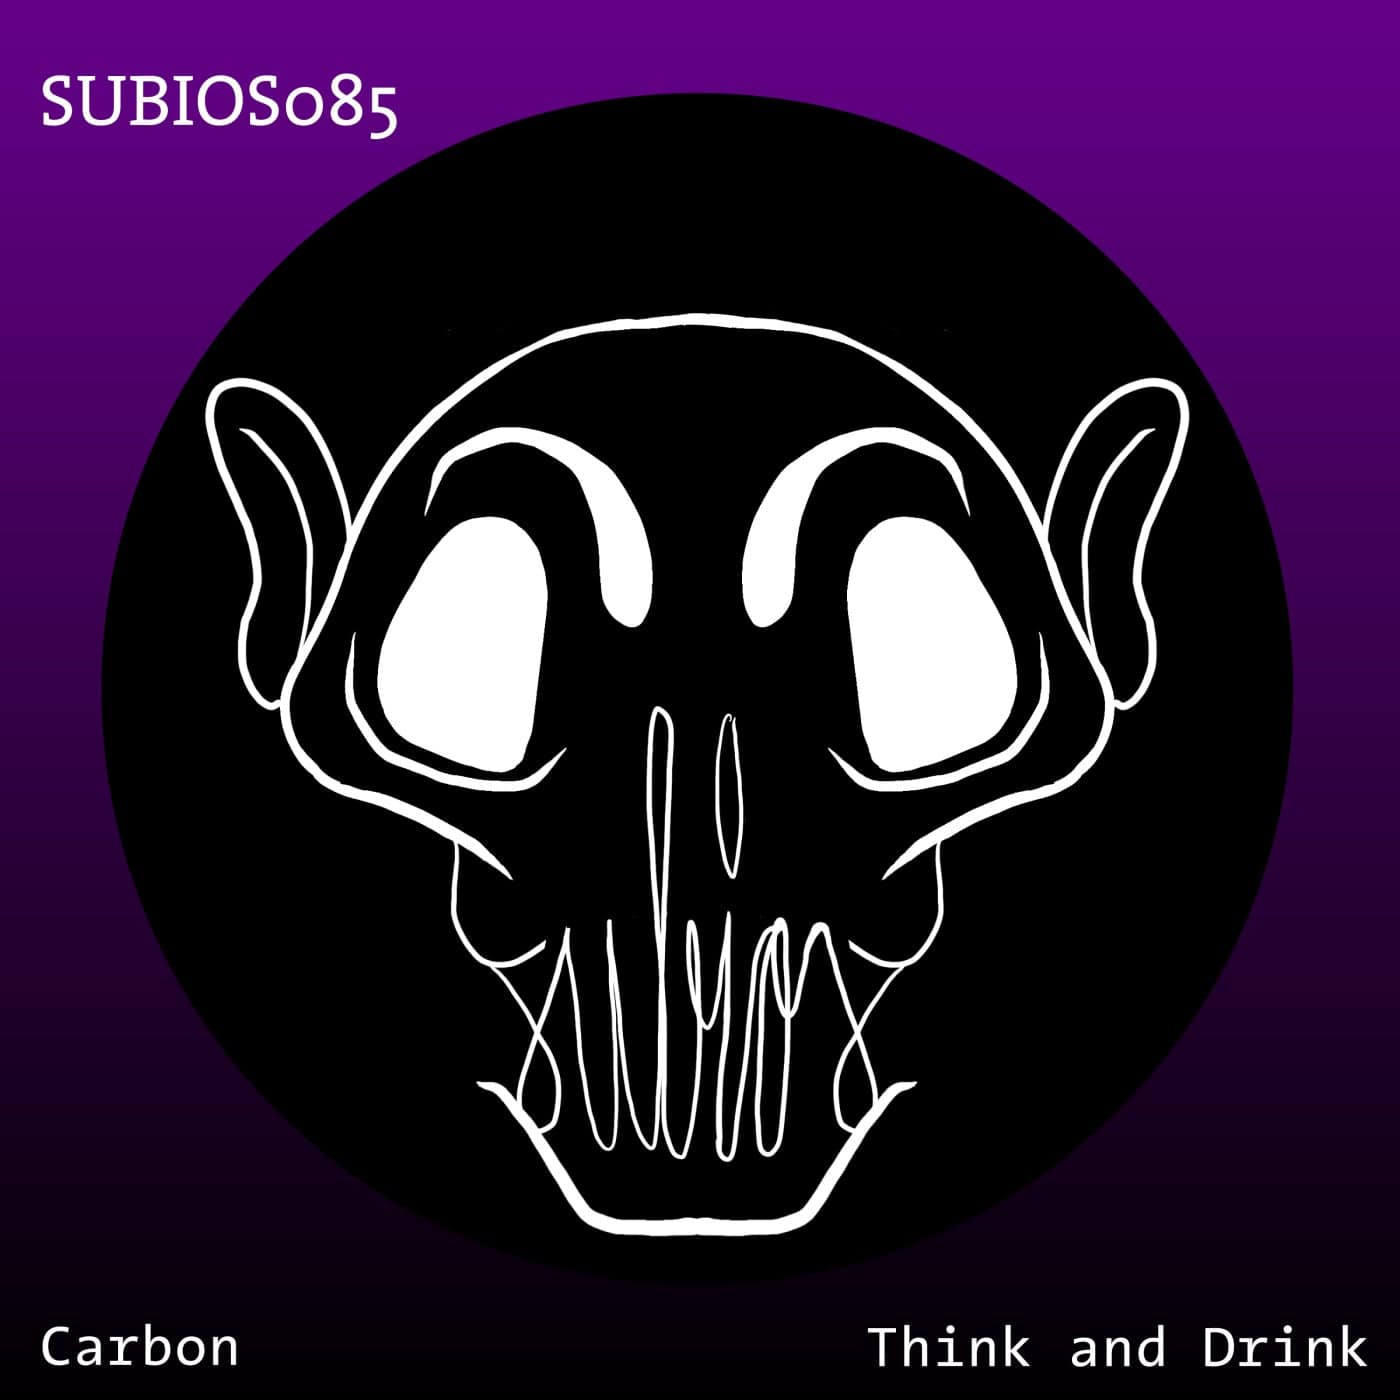 image cover: Carbon - Think and Drink / SUBIOS085